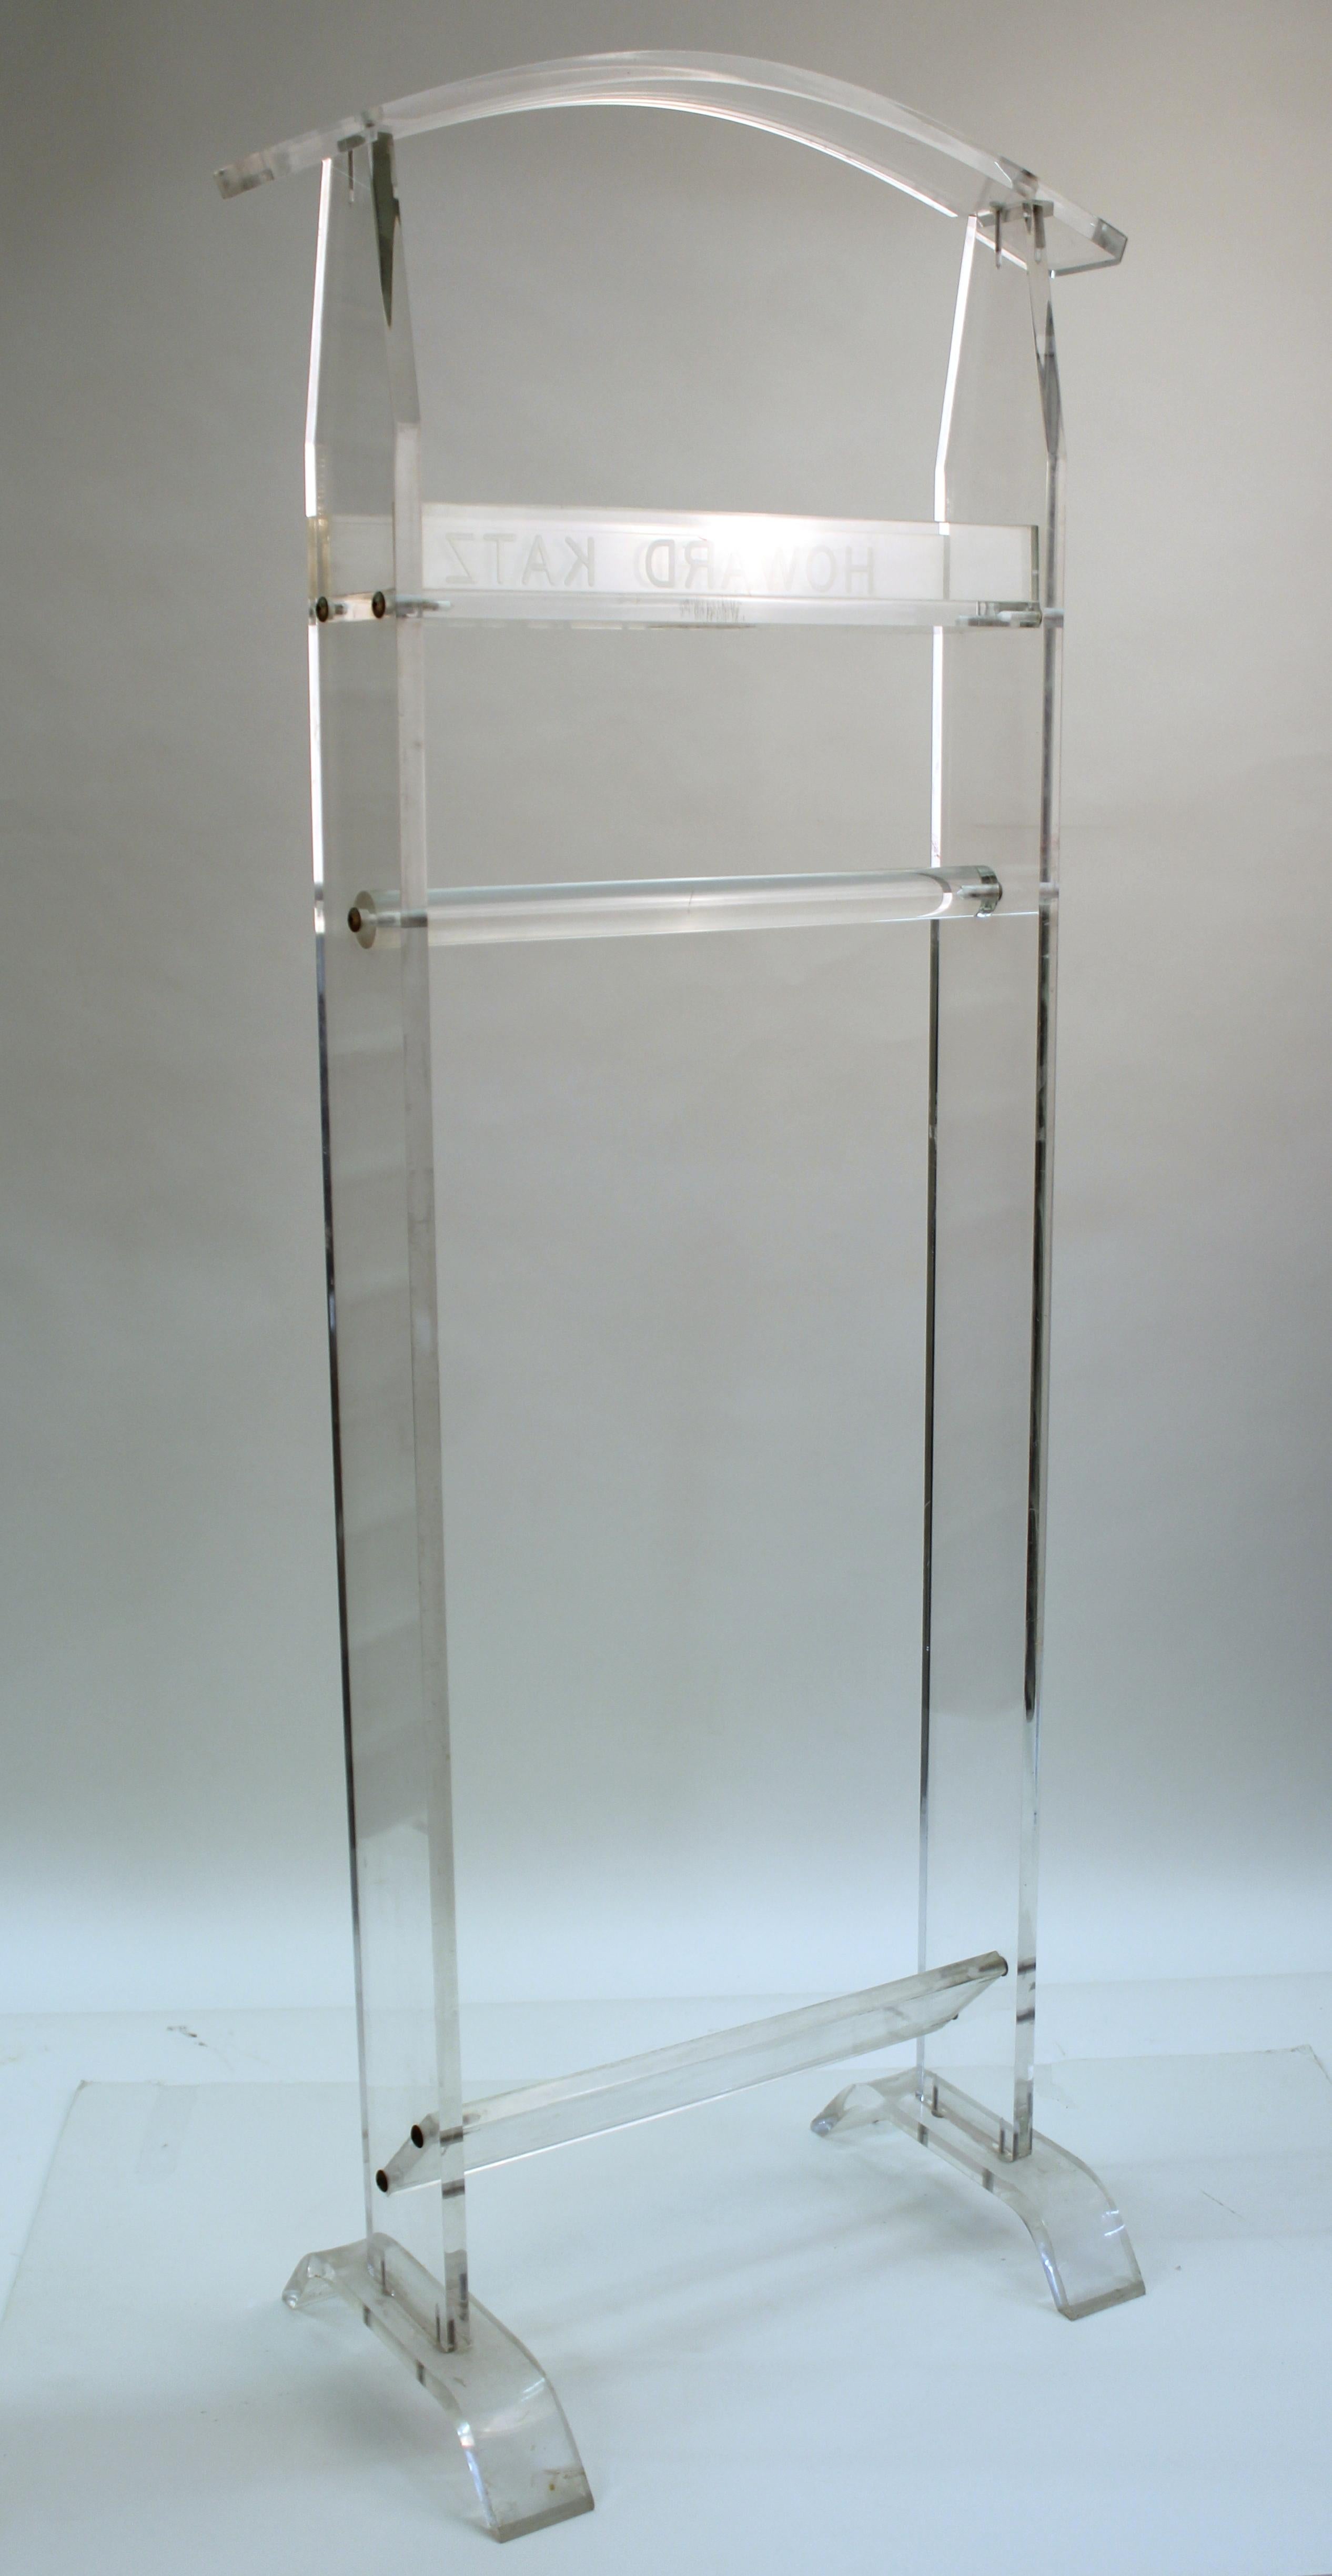 Modern valet in Lucite with engraved name of 'Howard Katz' on the front. The piece has a slanted Lucite board on the lower part to place shoes. In good vintage condition, with age-appropriate wear to the Lucite.